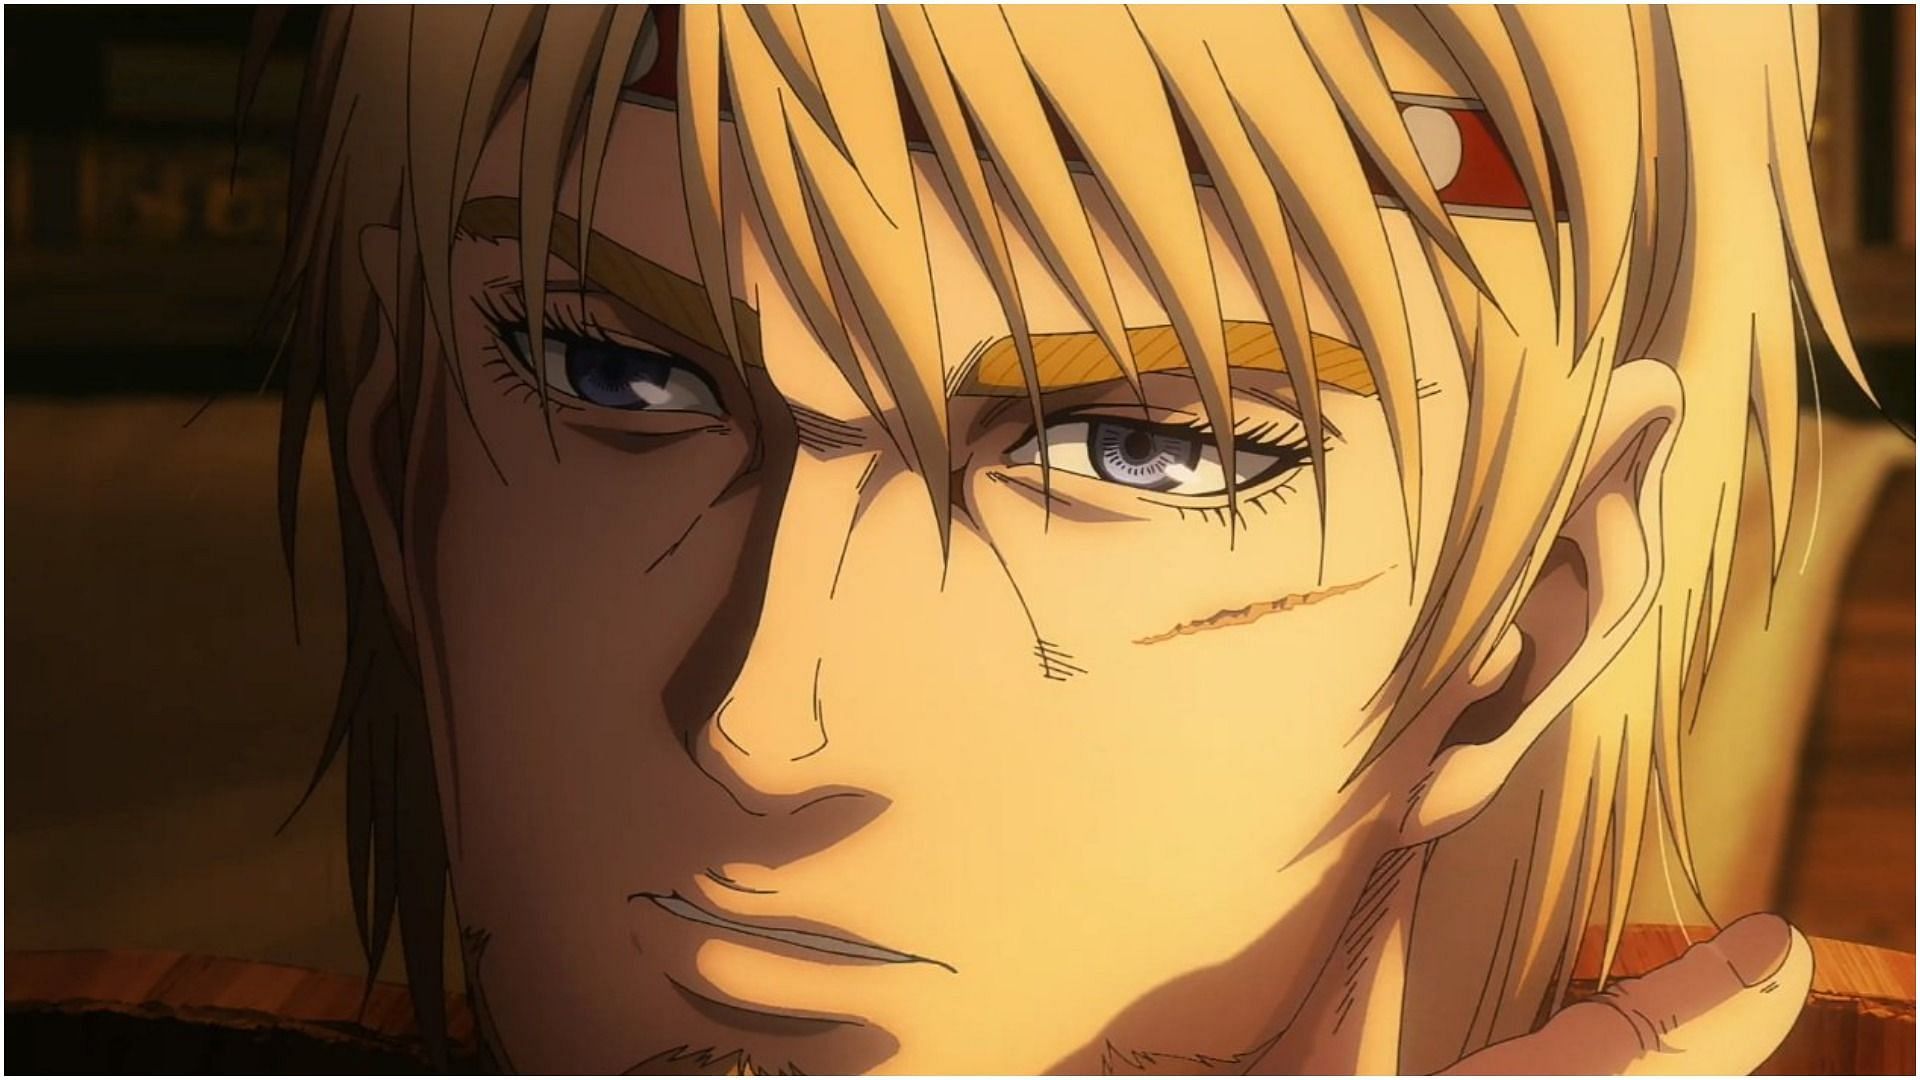 Thorrfinn&#039;s new look as seen in the official trailer of Vinland Saga season 2 (Image credits: Twin Engine)